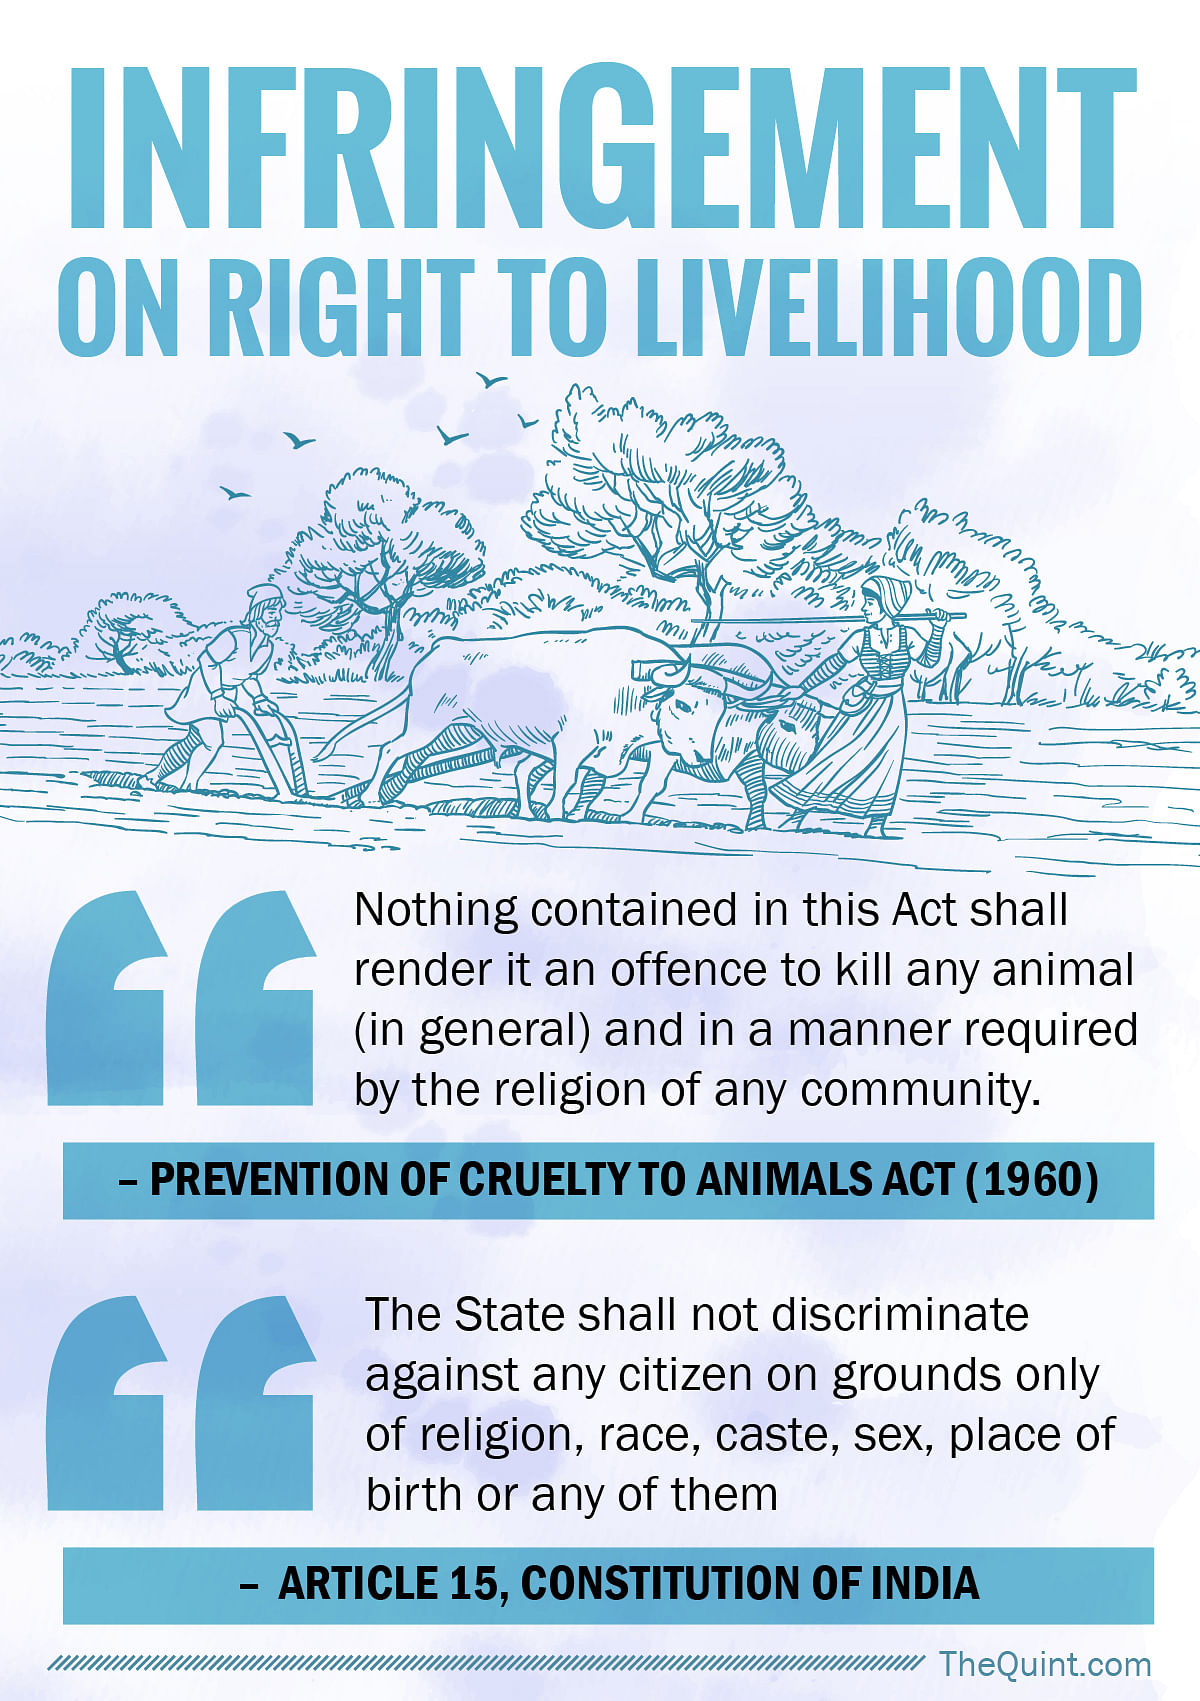 Government’s recent order on cattle slaughter is an infringement on the fundamental rights of Indians.